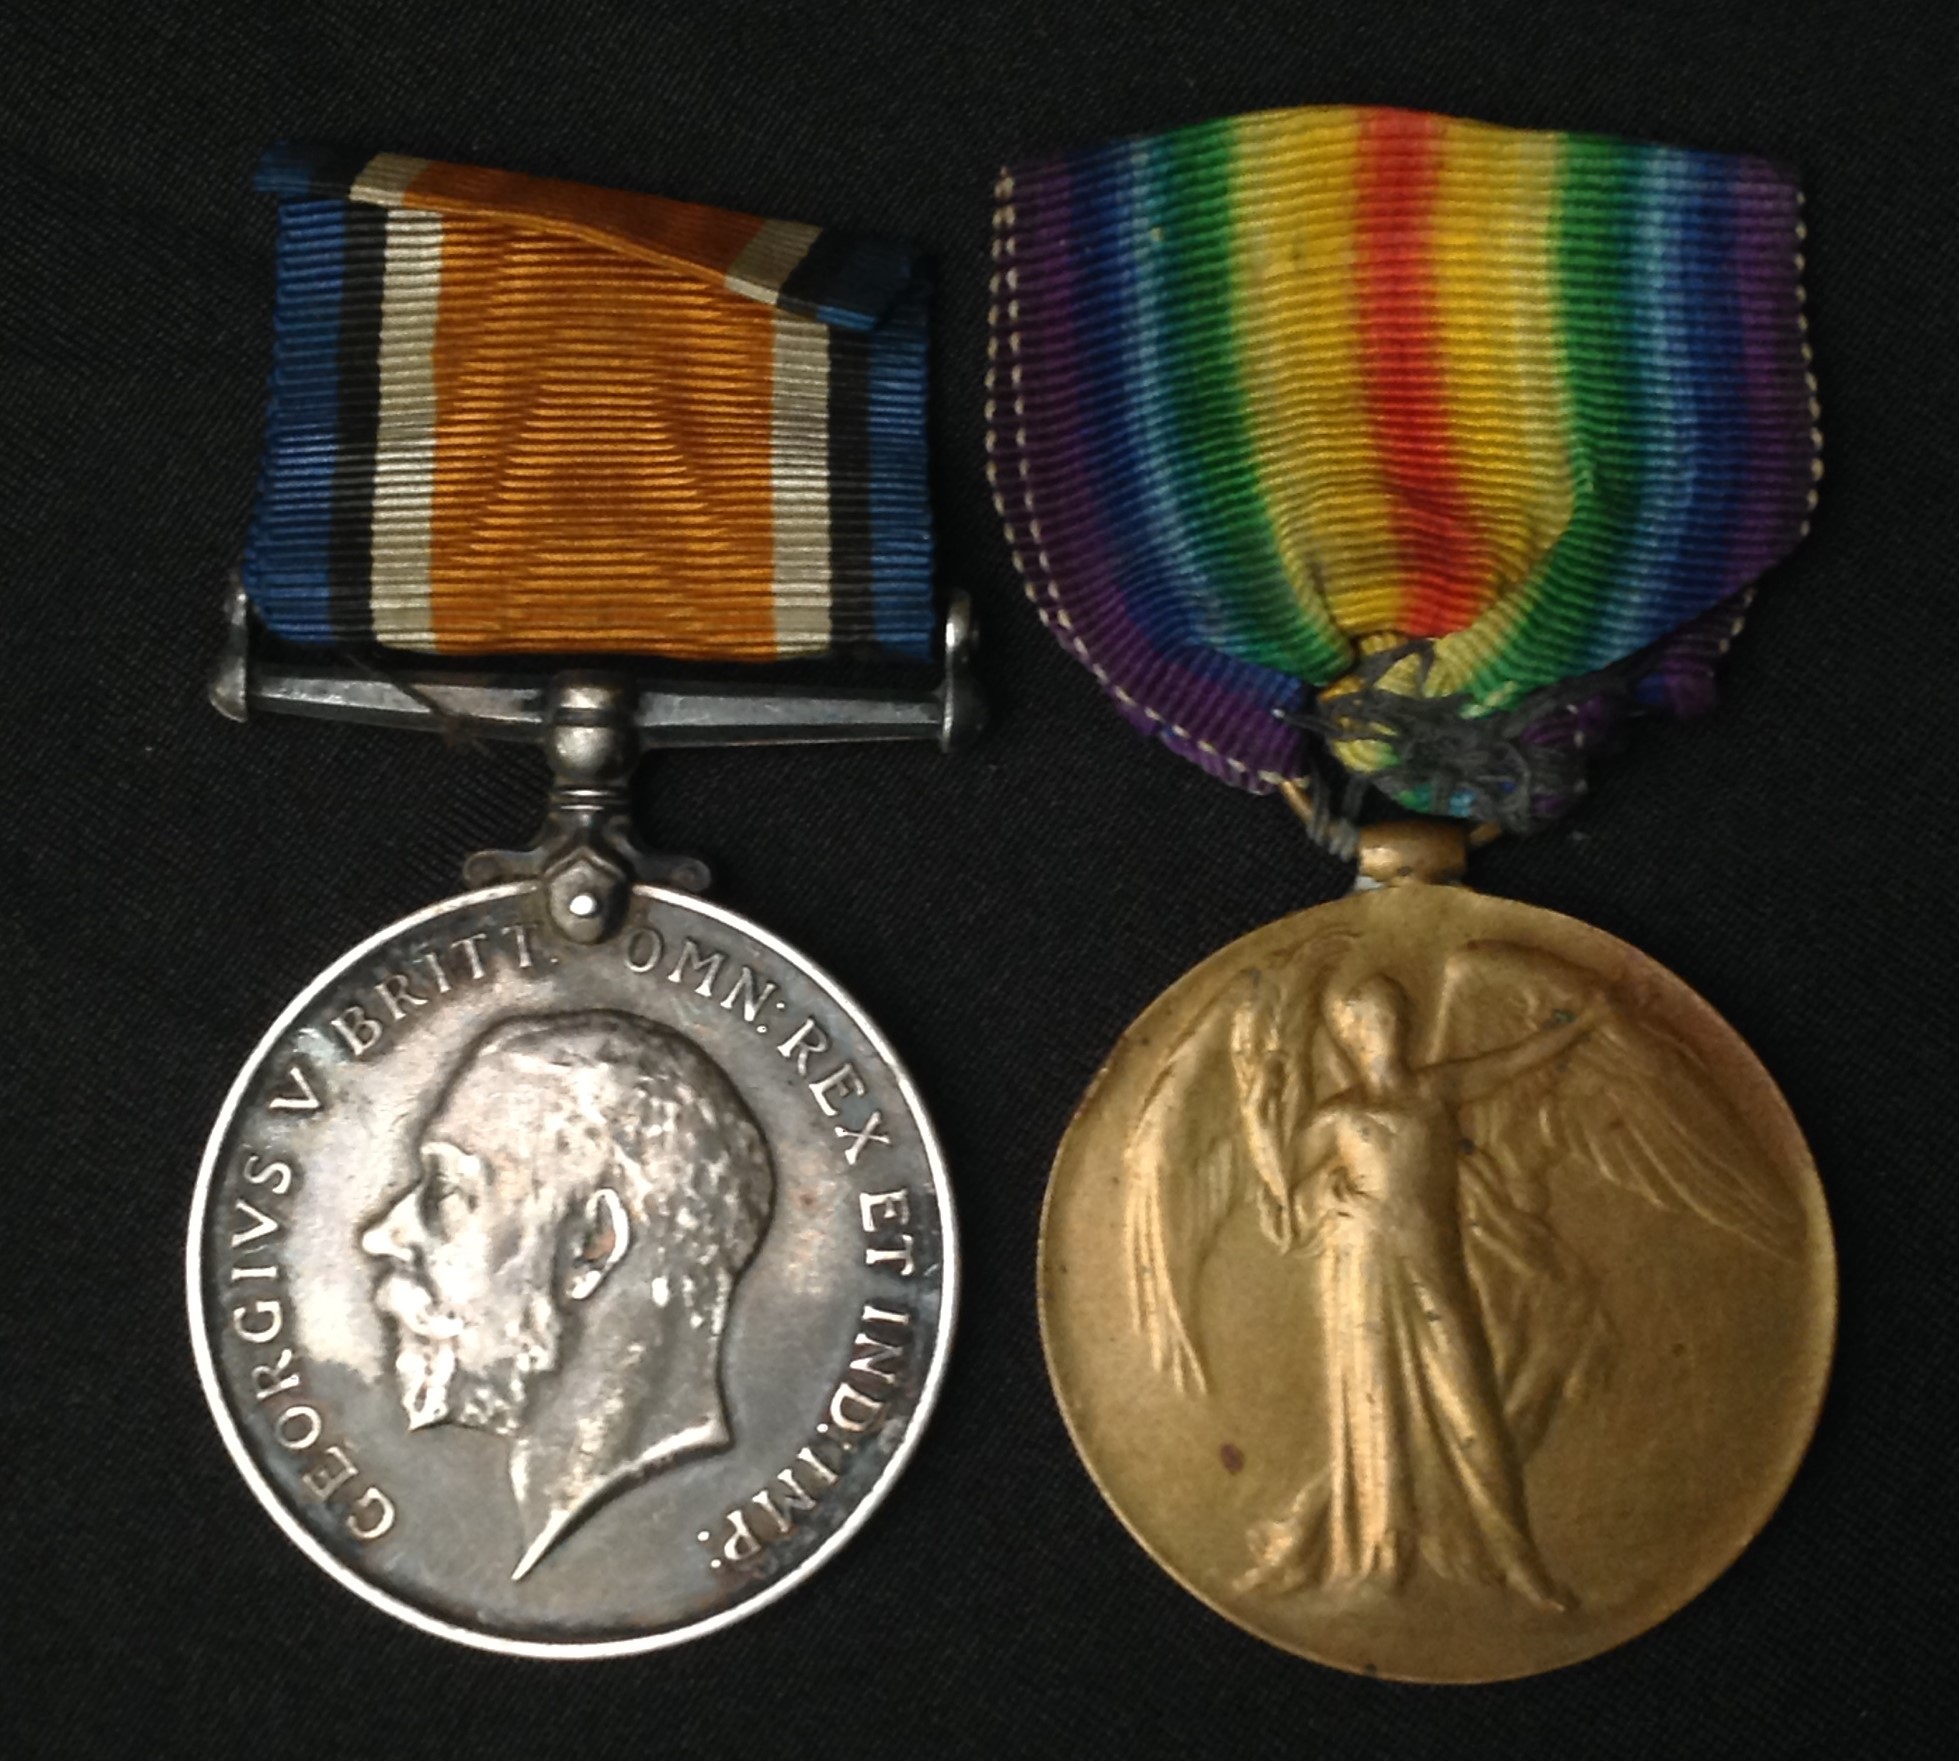 WW1 British War Medal and Victory Medal to G-13355 Pte F Morris, The Queens Regt. Complete with